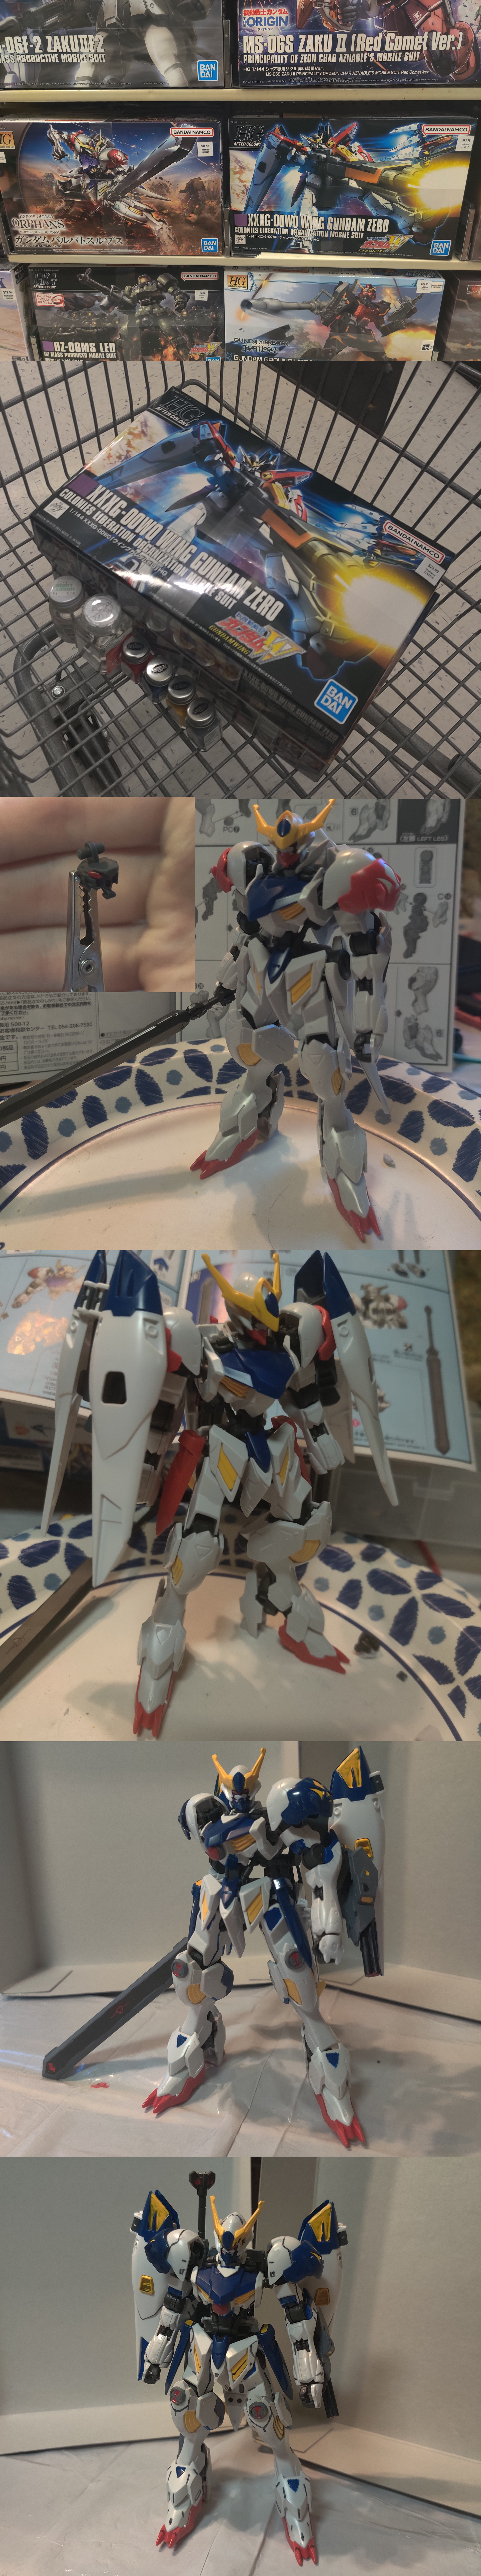 (almost) the entire process of making the barbatos alatus | made w/ Imgflip meme maker